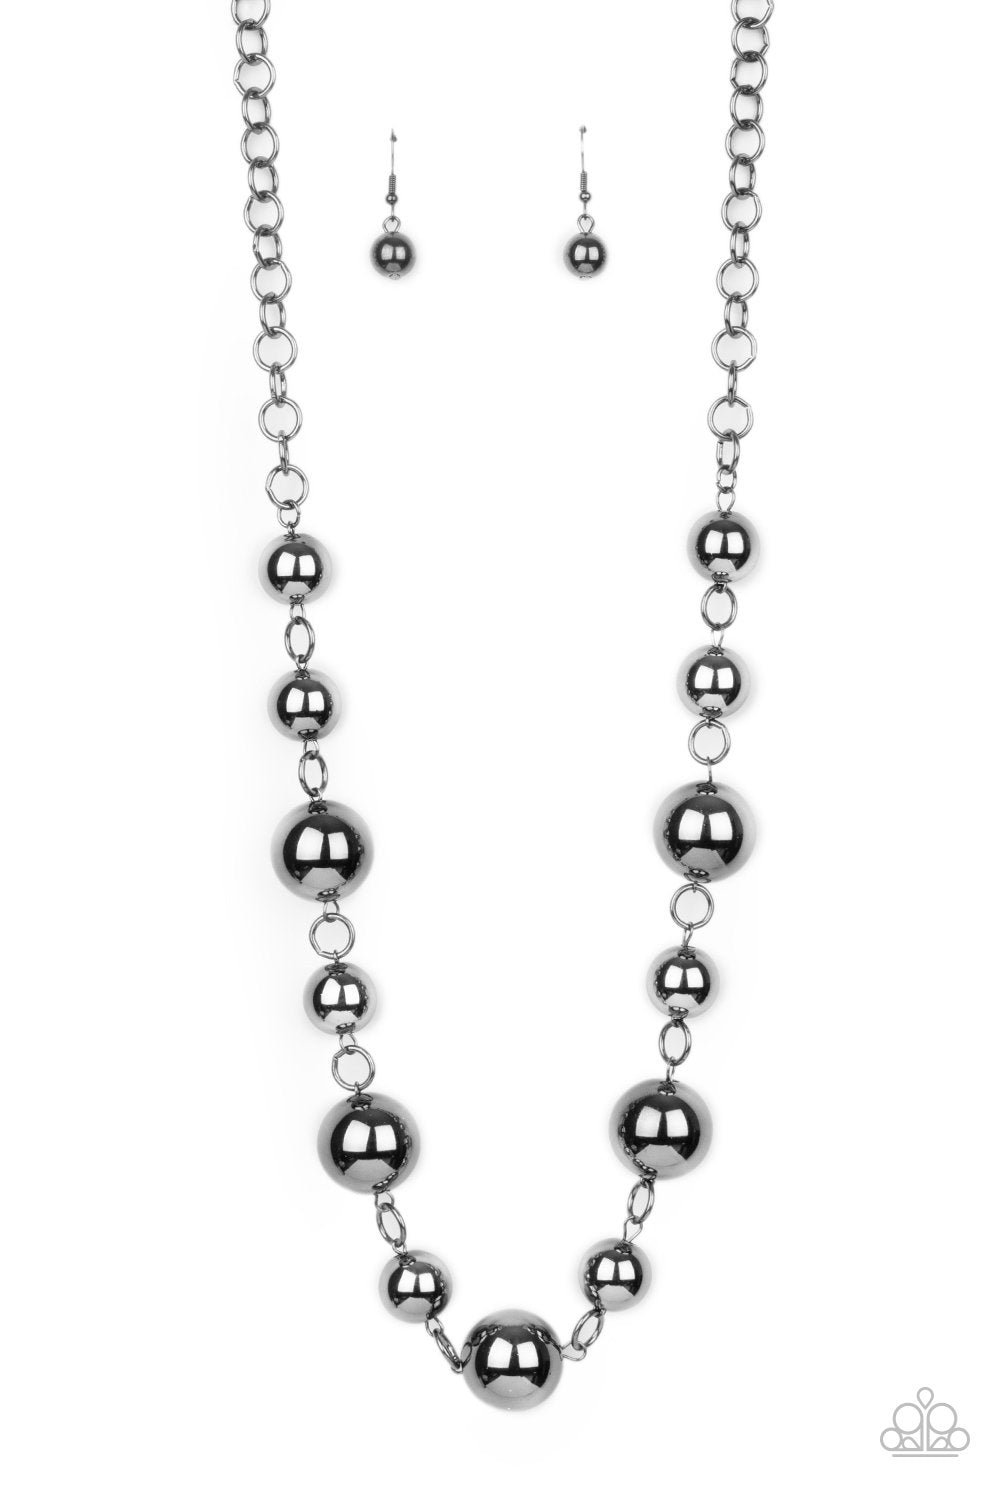 &lt;p&gt;An oversized collection of intense gunmetal beads boldly link below the collar, creating a dramatic industrial display. Features an adjustable clasp closure. &lt;/p&gt;  

&lt;p&gt; &lt;i&gt;Sold as one individual necklace.  Includes one pair of matching earrings.
&lt;/i&gt;  &lt;/p&gt;

&lt;img src=\&quot;https://d9b54x484lq62.cloudfront.net/paparazzi/shopping/images/517_tag150x115_1.png\&quot; alt=\&quot;New Kit\&quot; align=\&quot;middle\&quot; height=\&quot;50\&quot; width=\&quot;50\&quot;&gt;